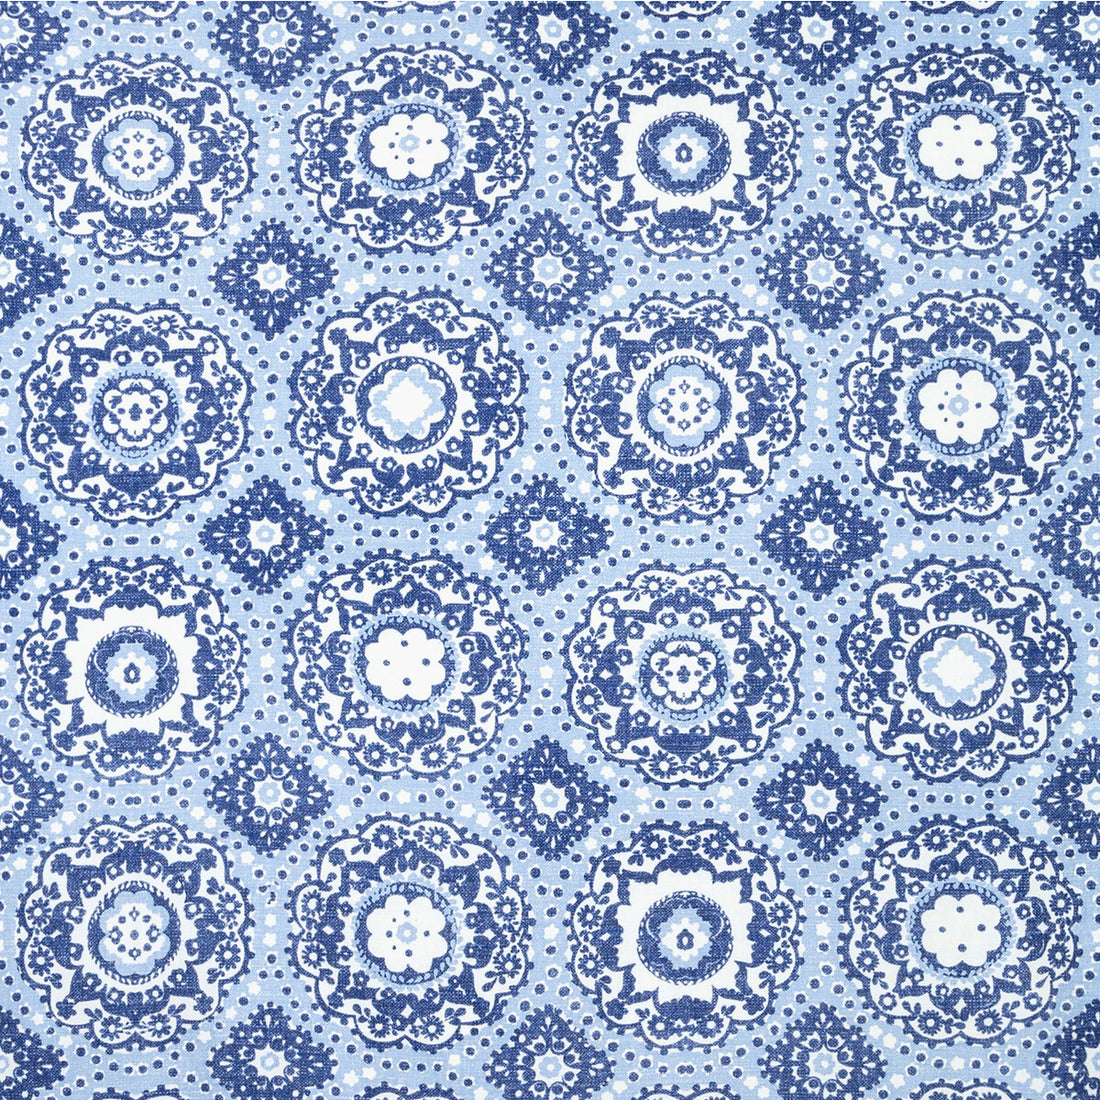 Bayview Print fabric in capri color - pattern 2020190.155.0 - by Lee Jofa in the Avondale collection